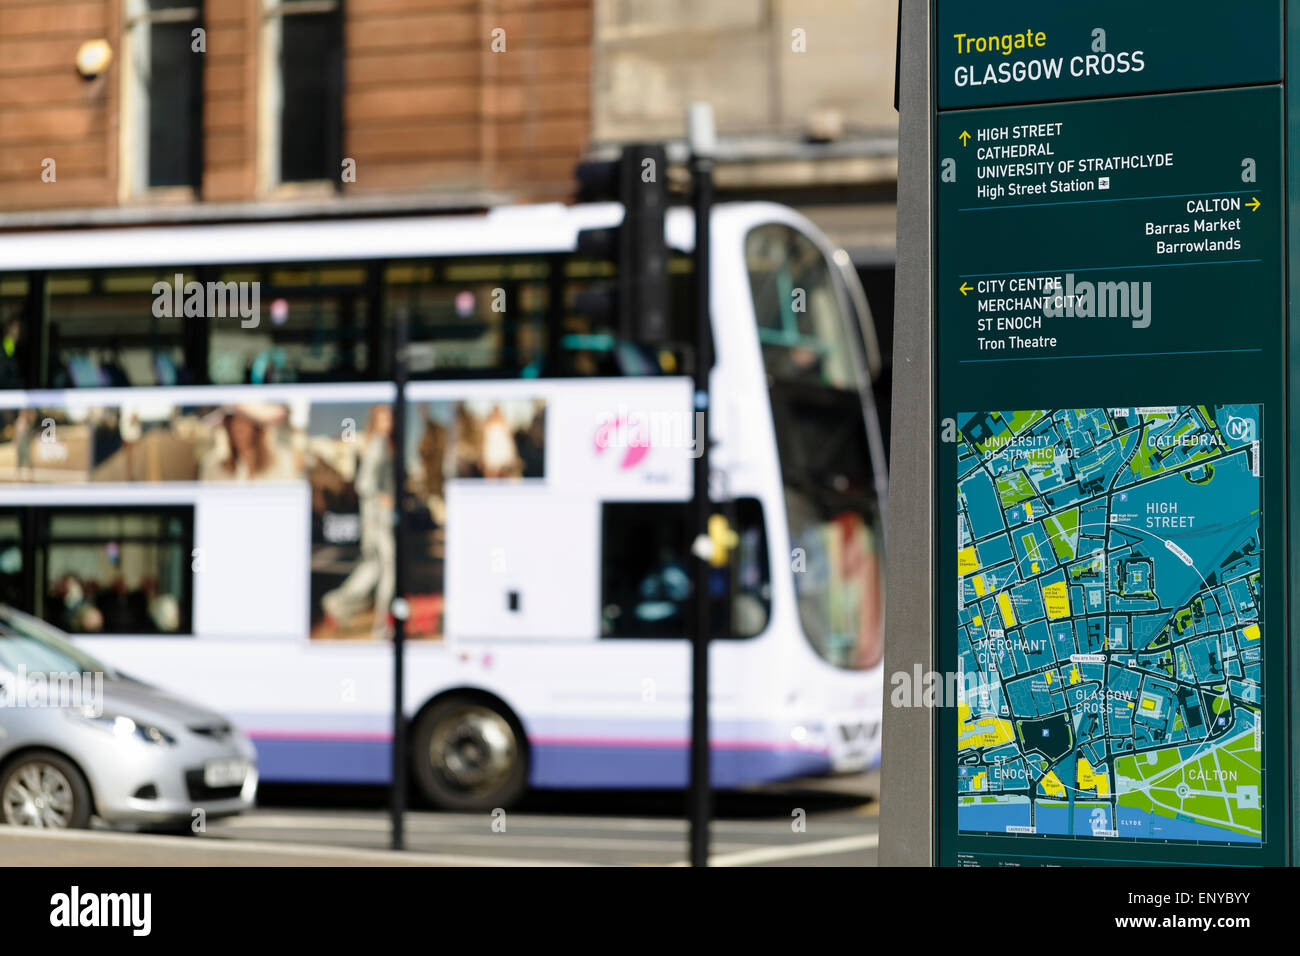 A Glasgow Public Street Map on Trongate in the city centre, Scotland, UK Foto Stock